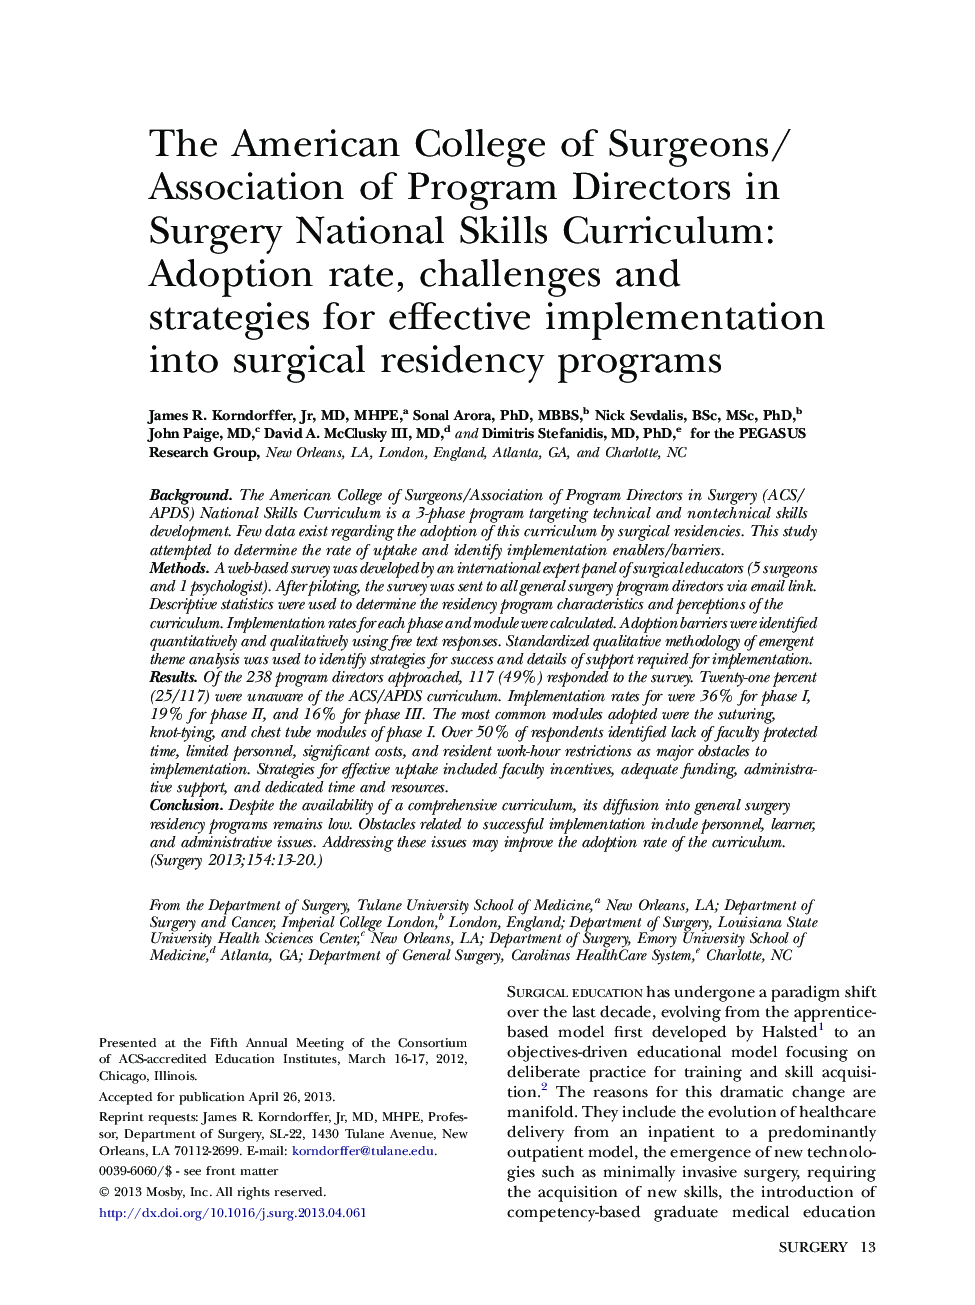 The American College of Surgeons/Association of Program Directors in Surgery National Skills Curriculum: Adoption rate, challenges and strategies for effective implementation into surgical residency programs